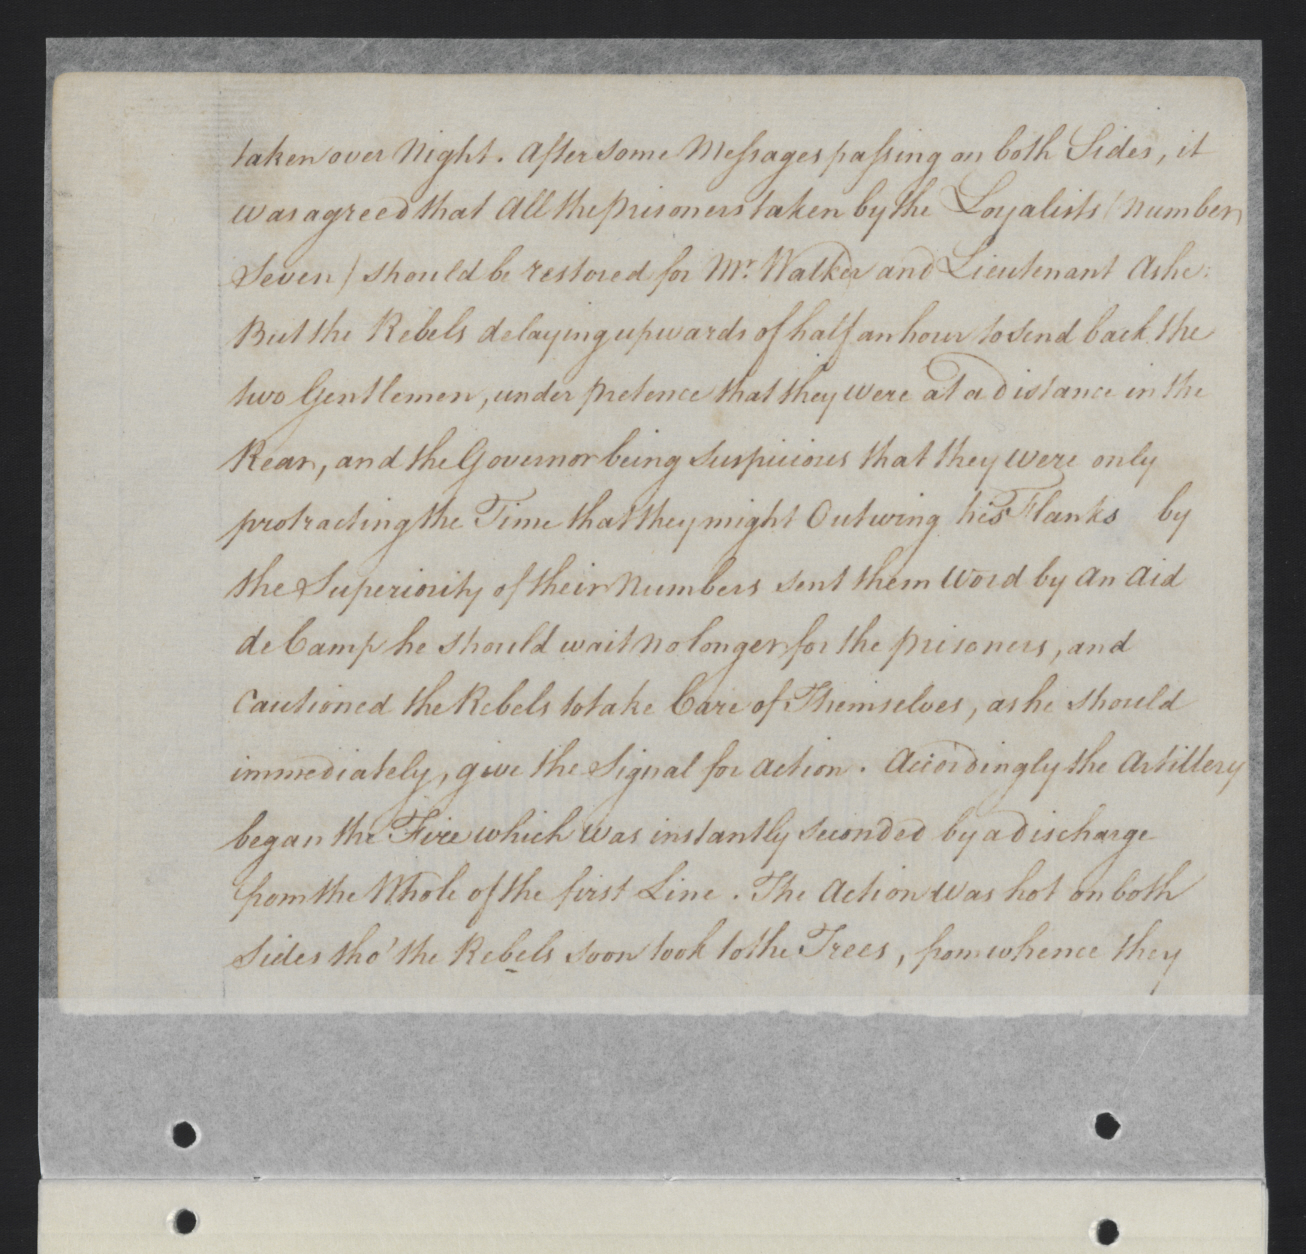 Journal Entry from William Tryon on the Expedition Against the Regulators, 16 May 1771, page 4.